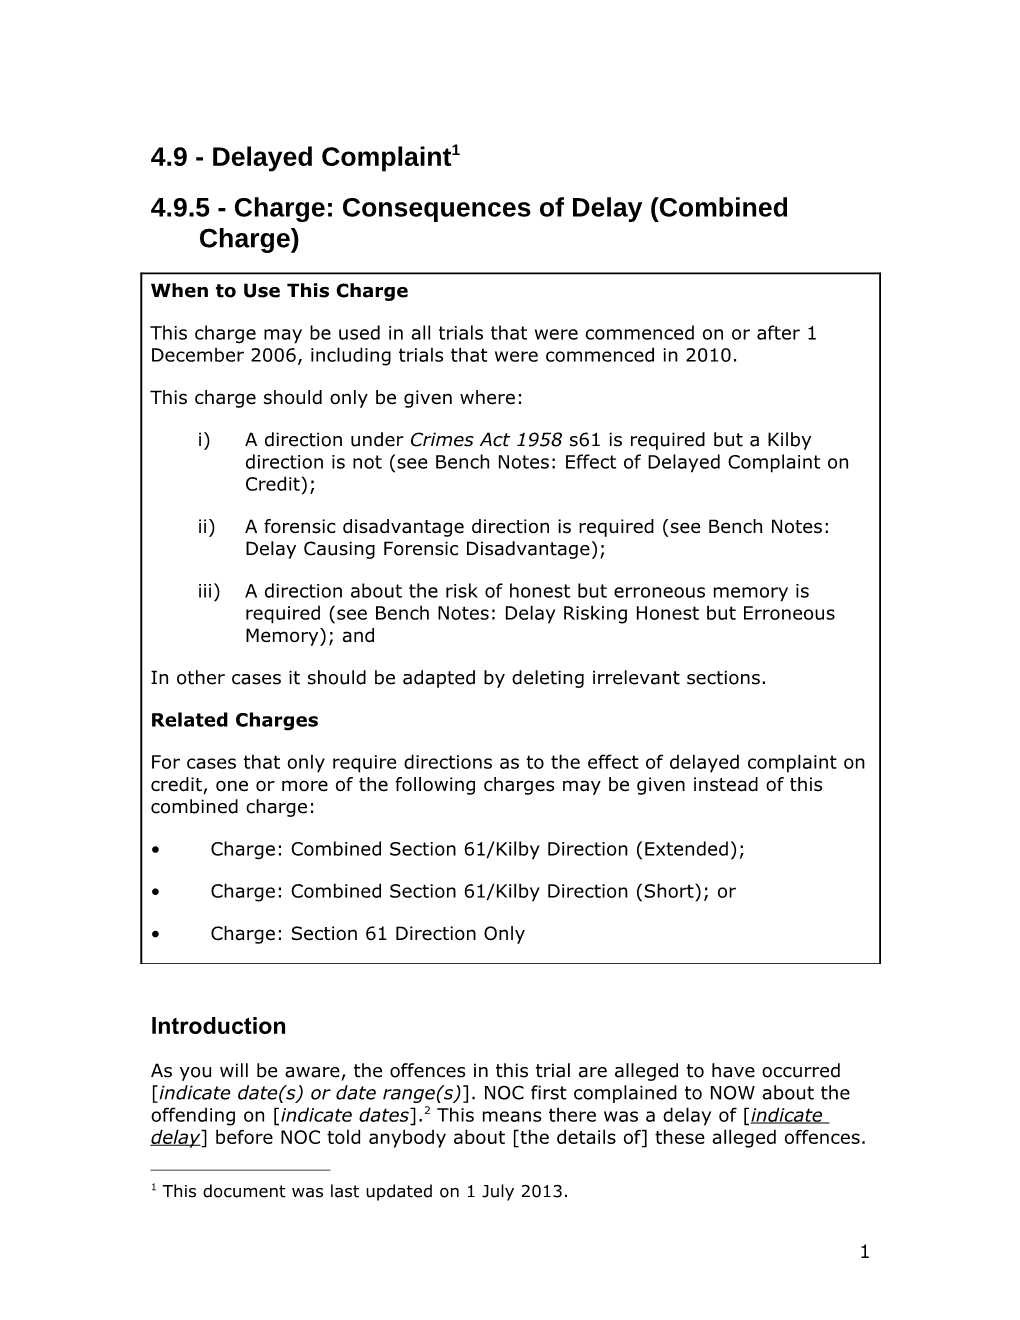 4.9.5 - Charge: Consequences of Delay (Combined Charge)